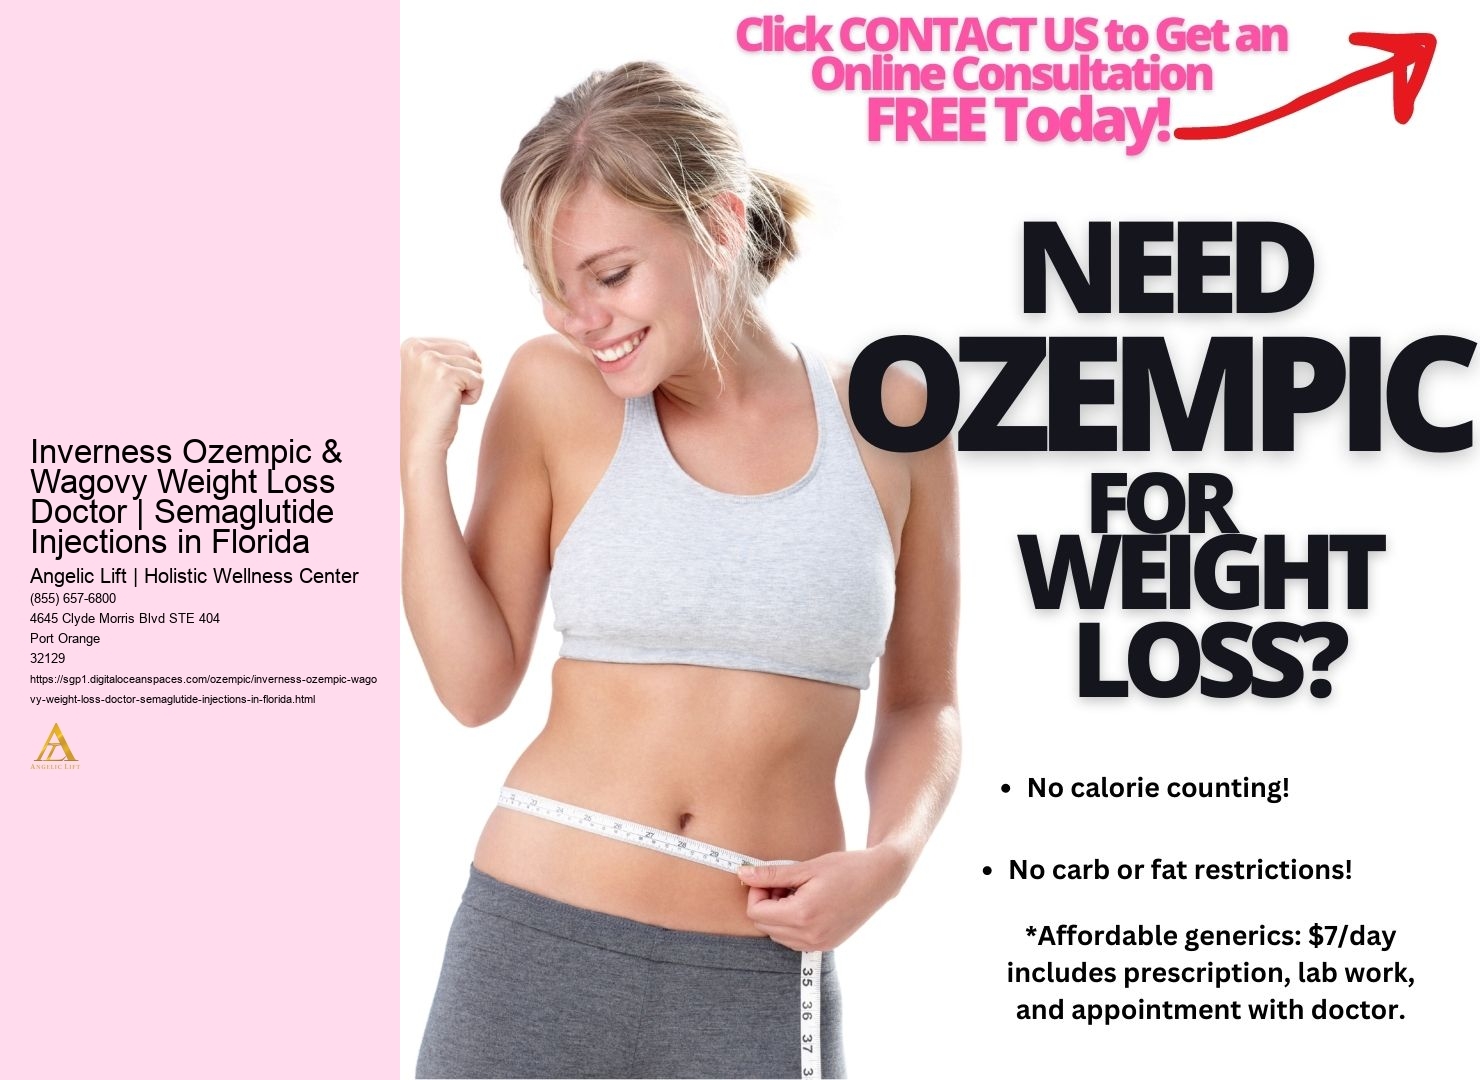 Inverness Ozempic & Wagovy Weight Loss Doctor | Semaglutide Injections in Florida